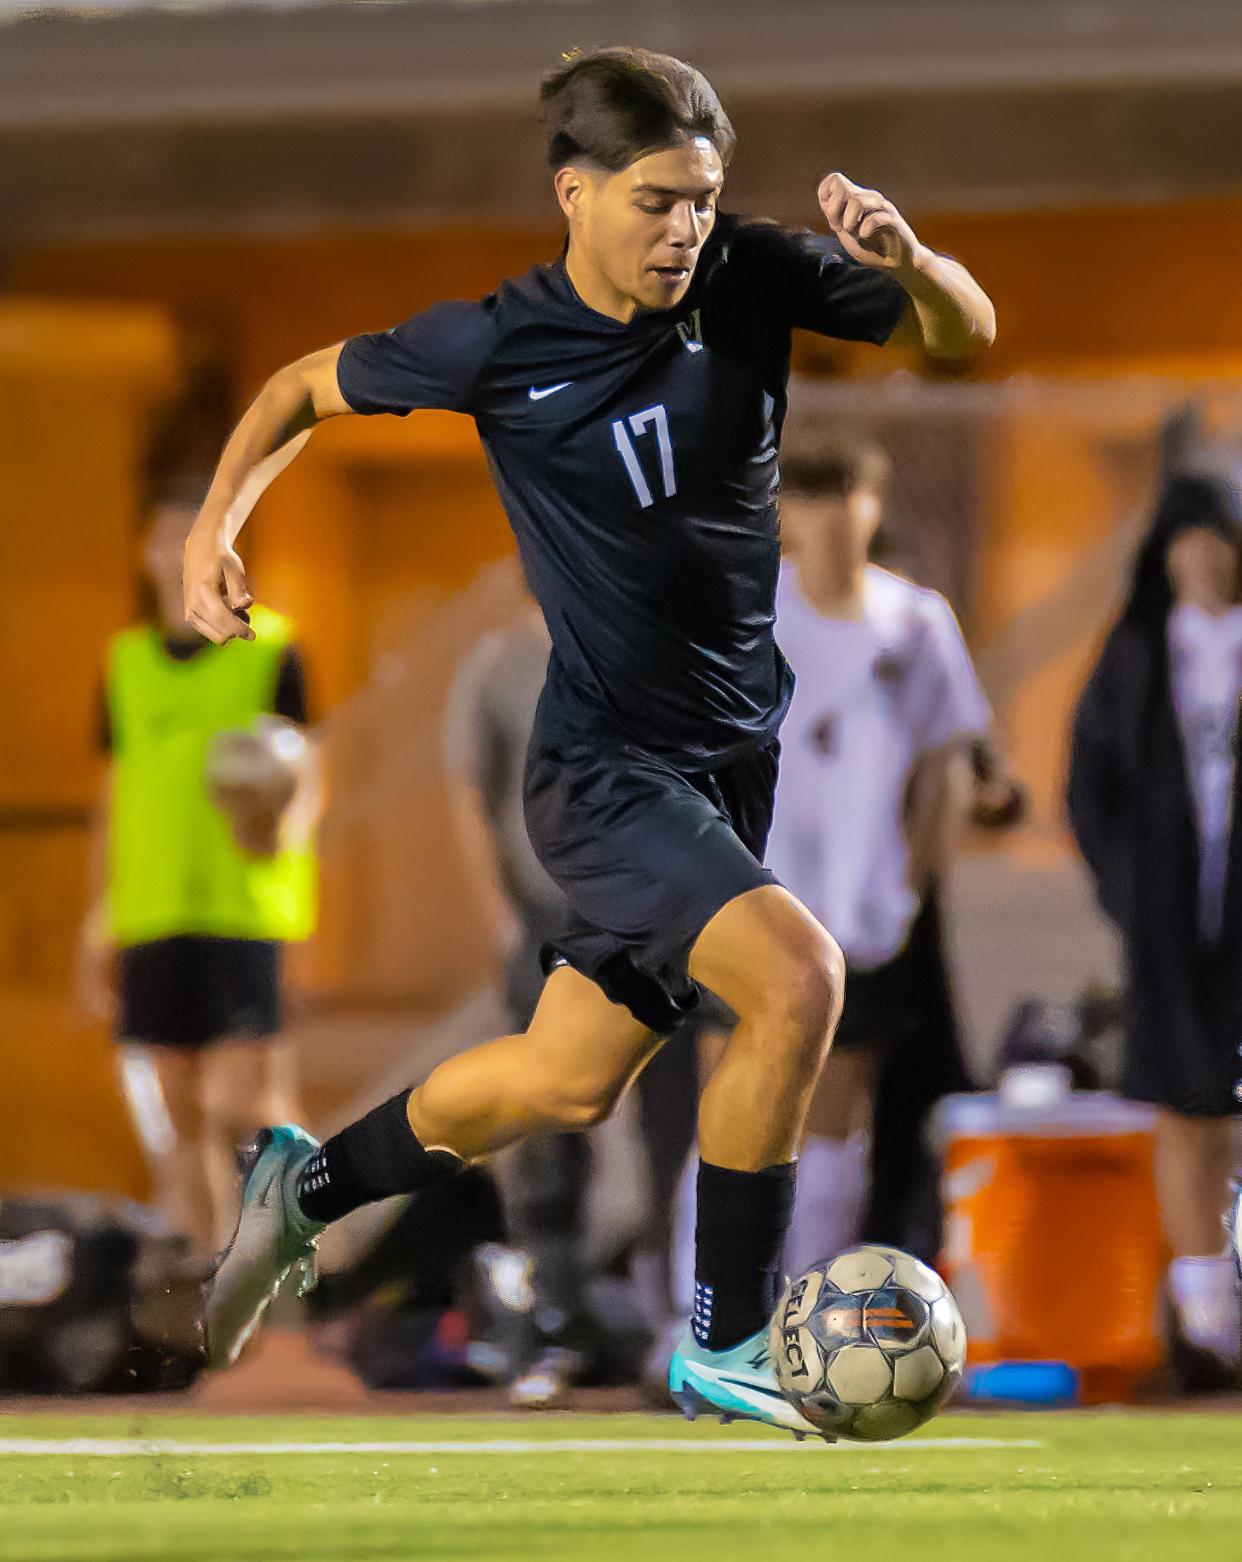 Vandegrift's Yandel Andrade dribbles the ball during the Vipers' District 25-6A match against Round Rock on Jan. 30.